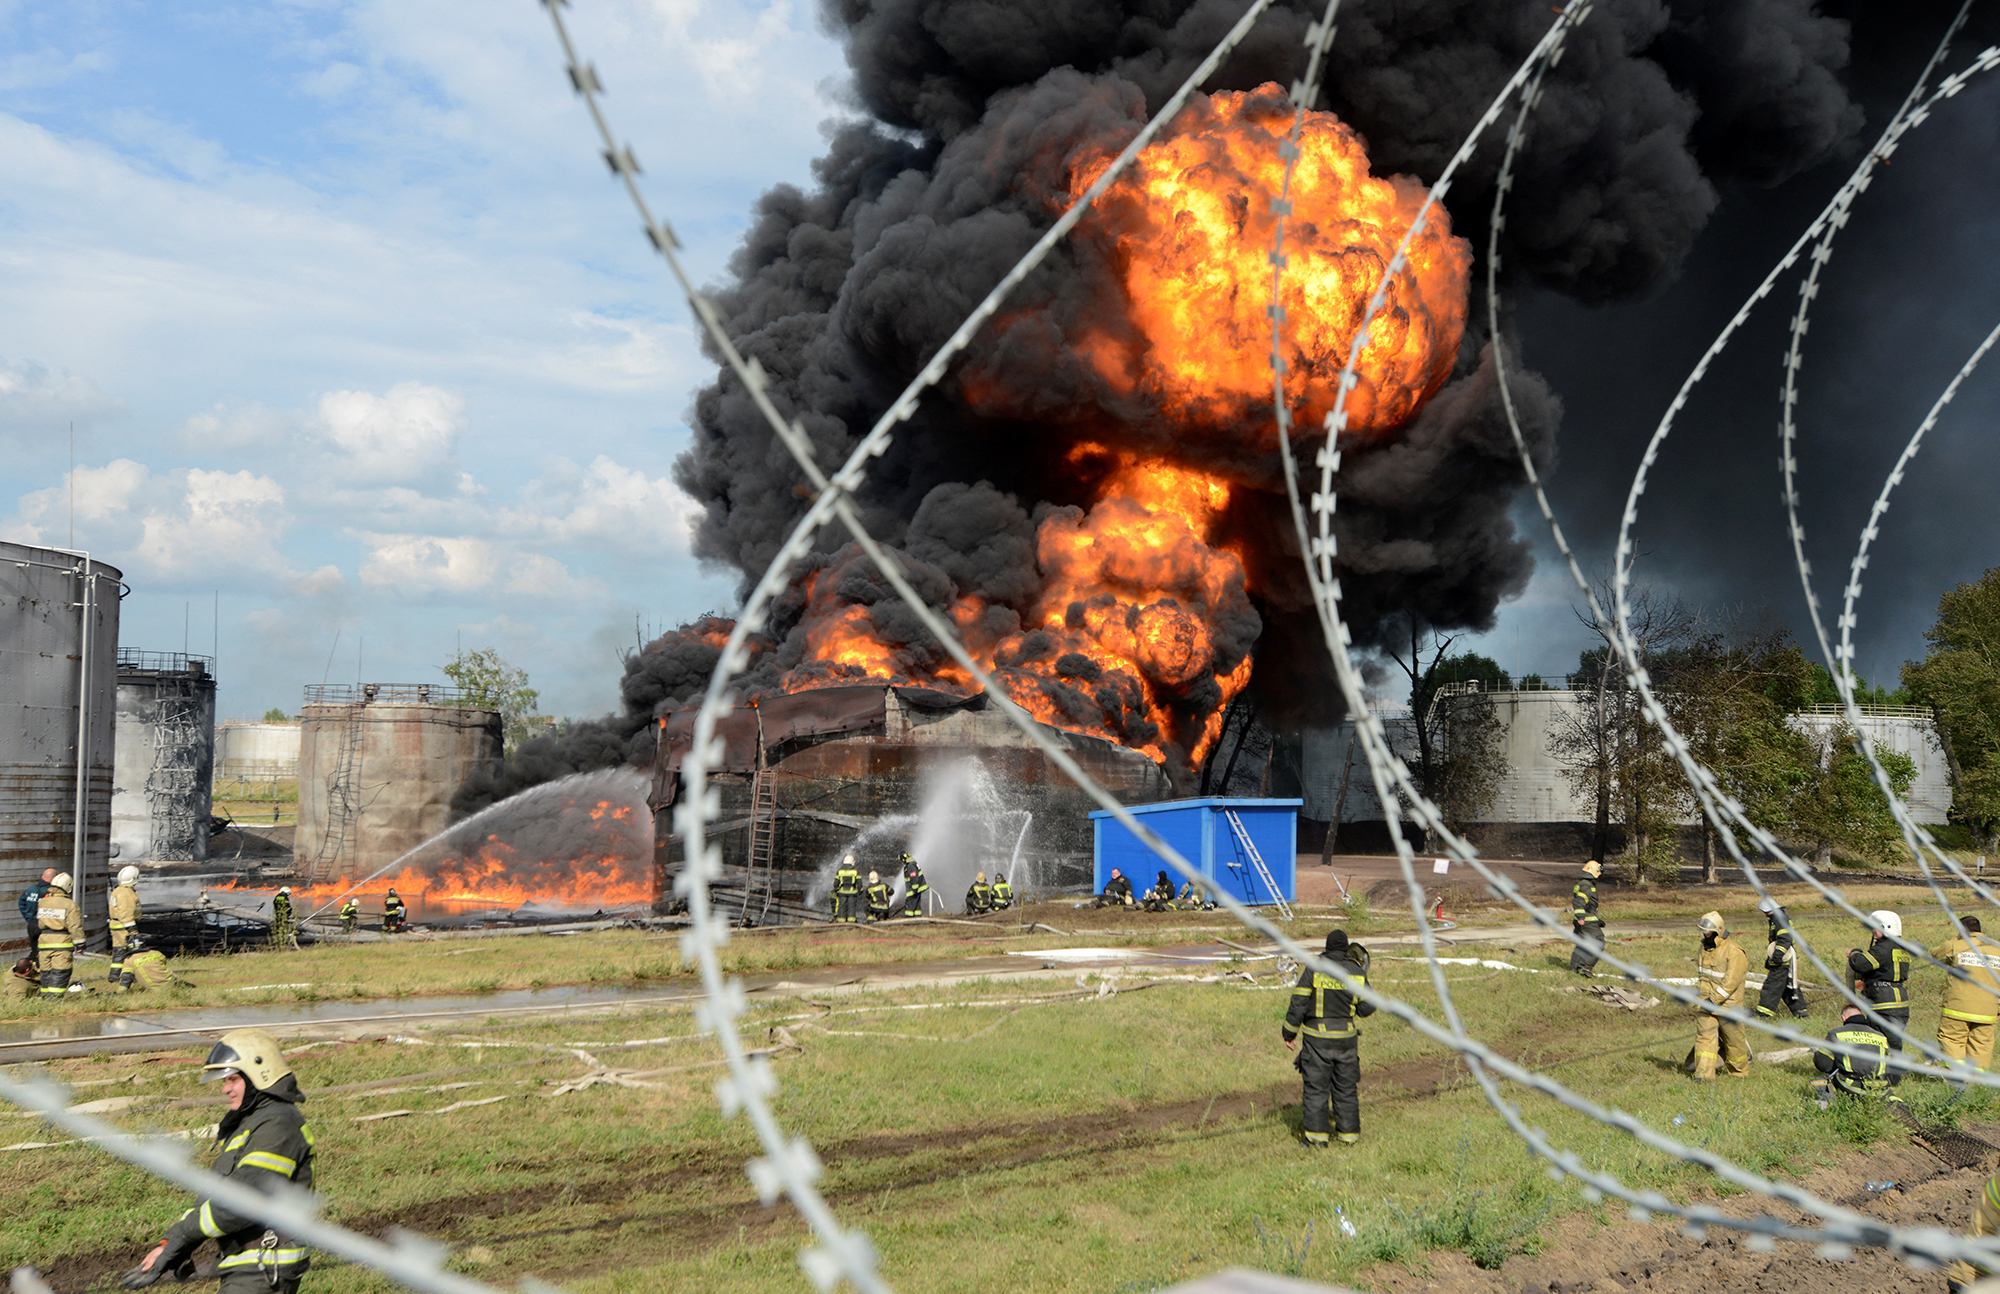 Emergency responders work to extinguish a burning fuel tank at an oil refinery in Voronezh, Russia, on June 24. 